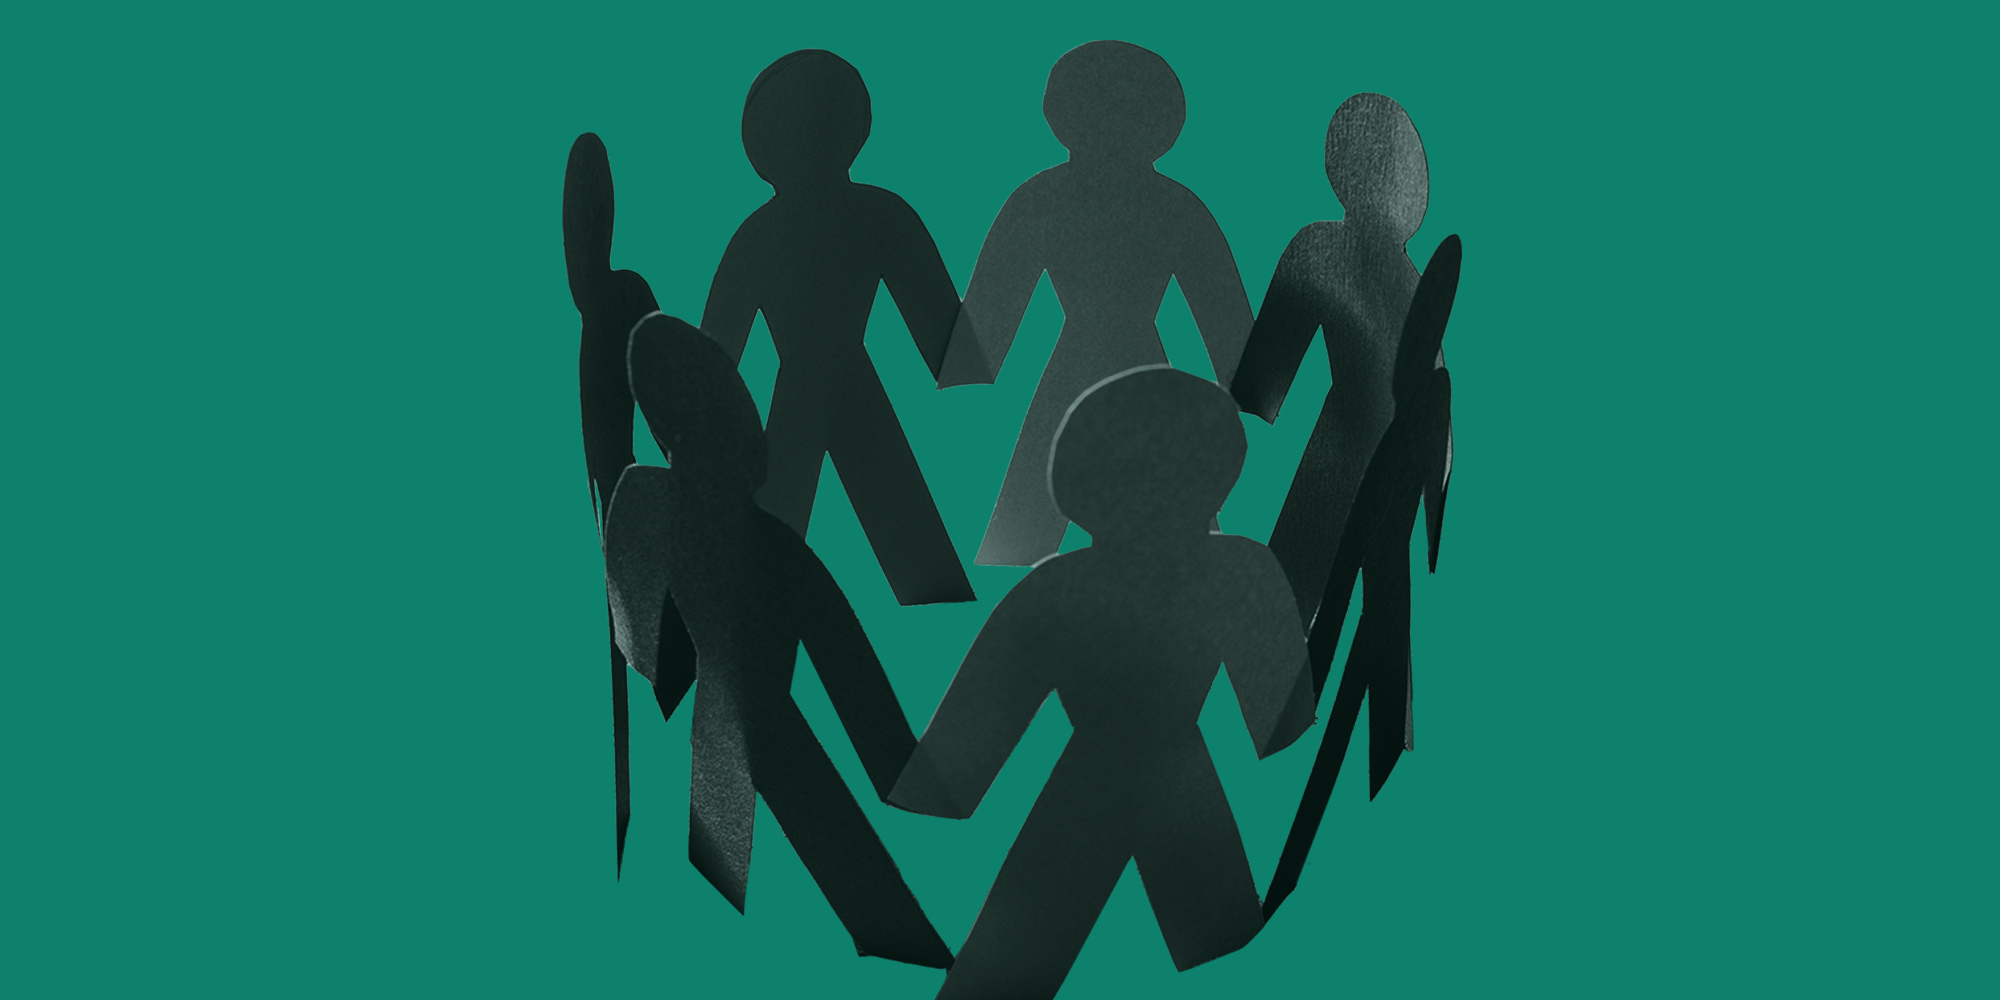 A circle of paper people holding hands. Substance use in the LGBTQIA community